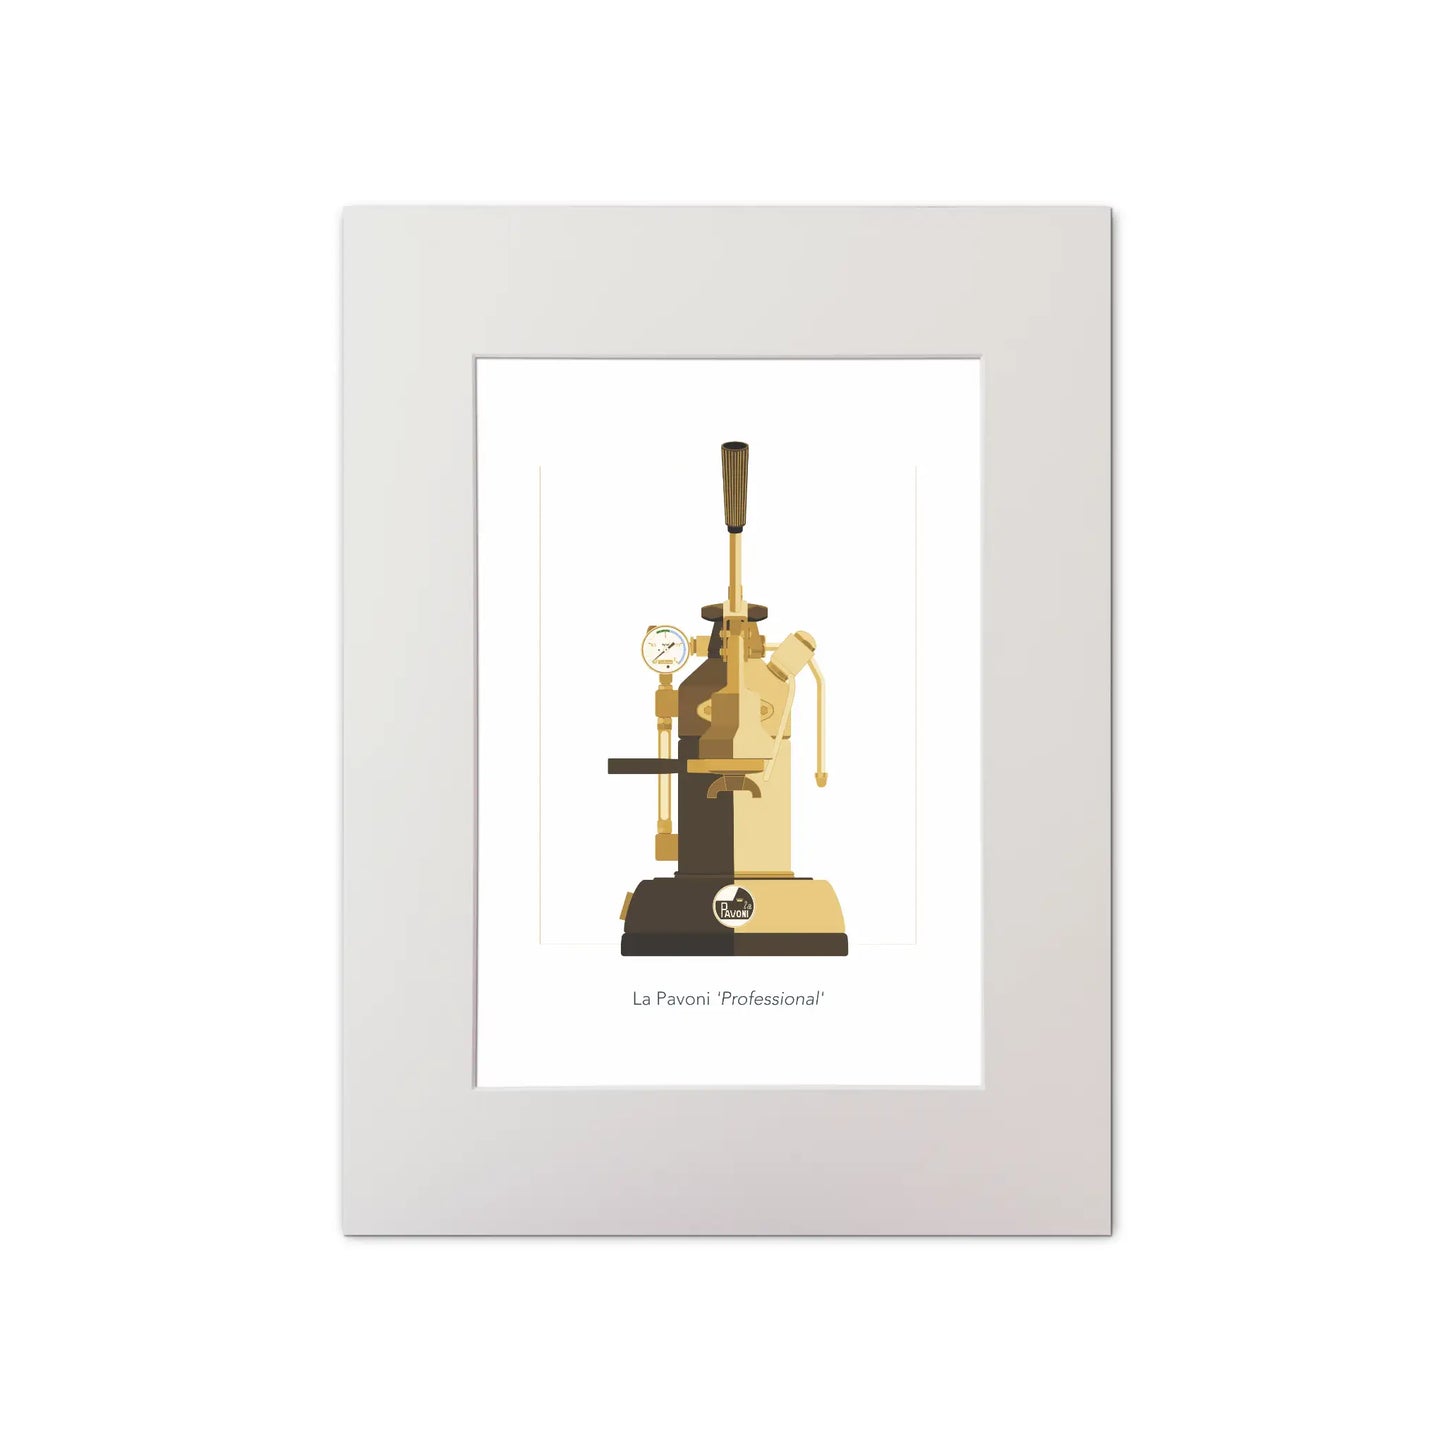 Mounted illustrated wall art of a La Pavoni lever coffee machine, front view in mocha brown.